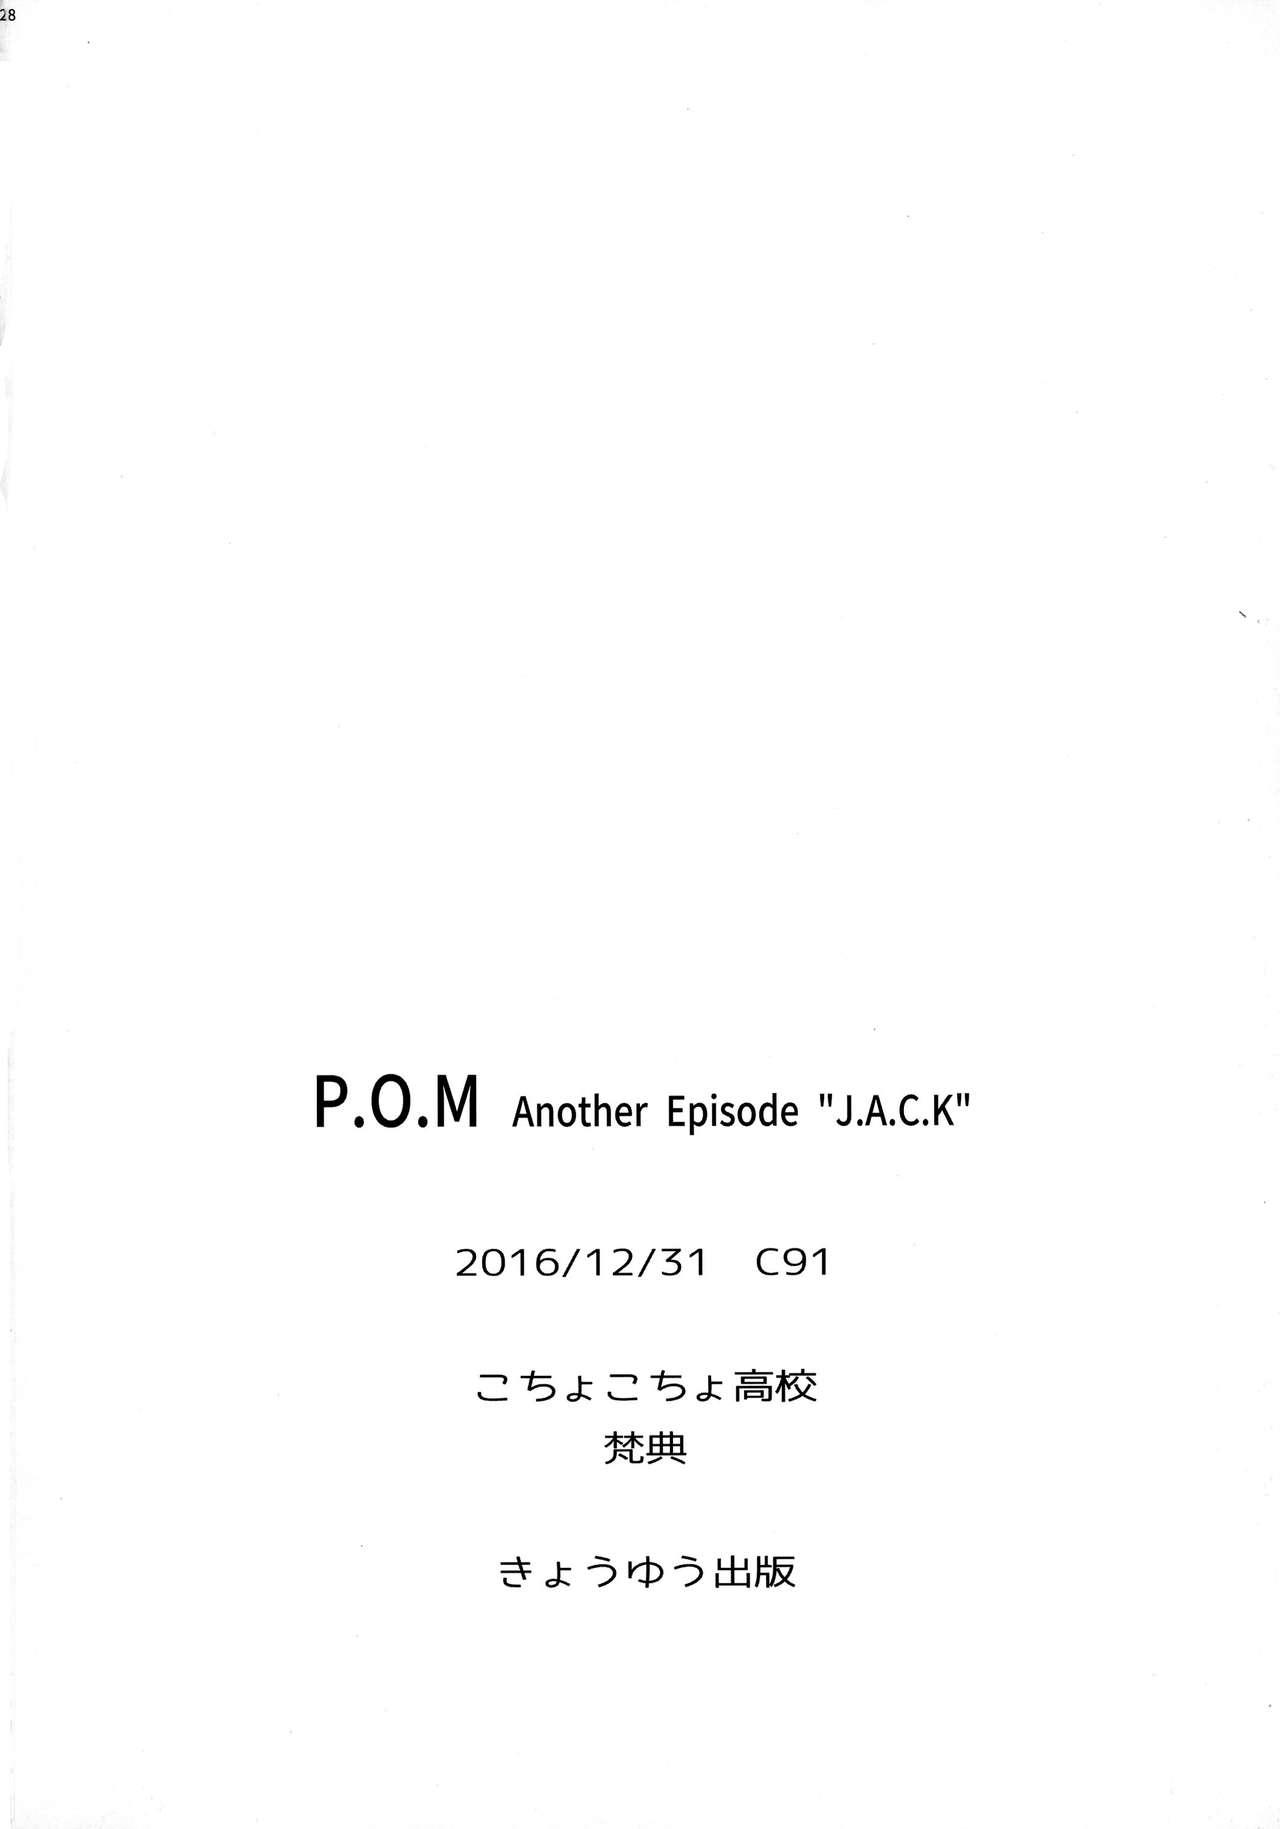 P.O.M Another Episode "J.A.C.K" 30